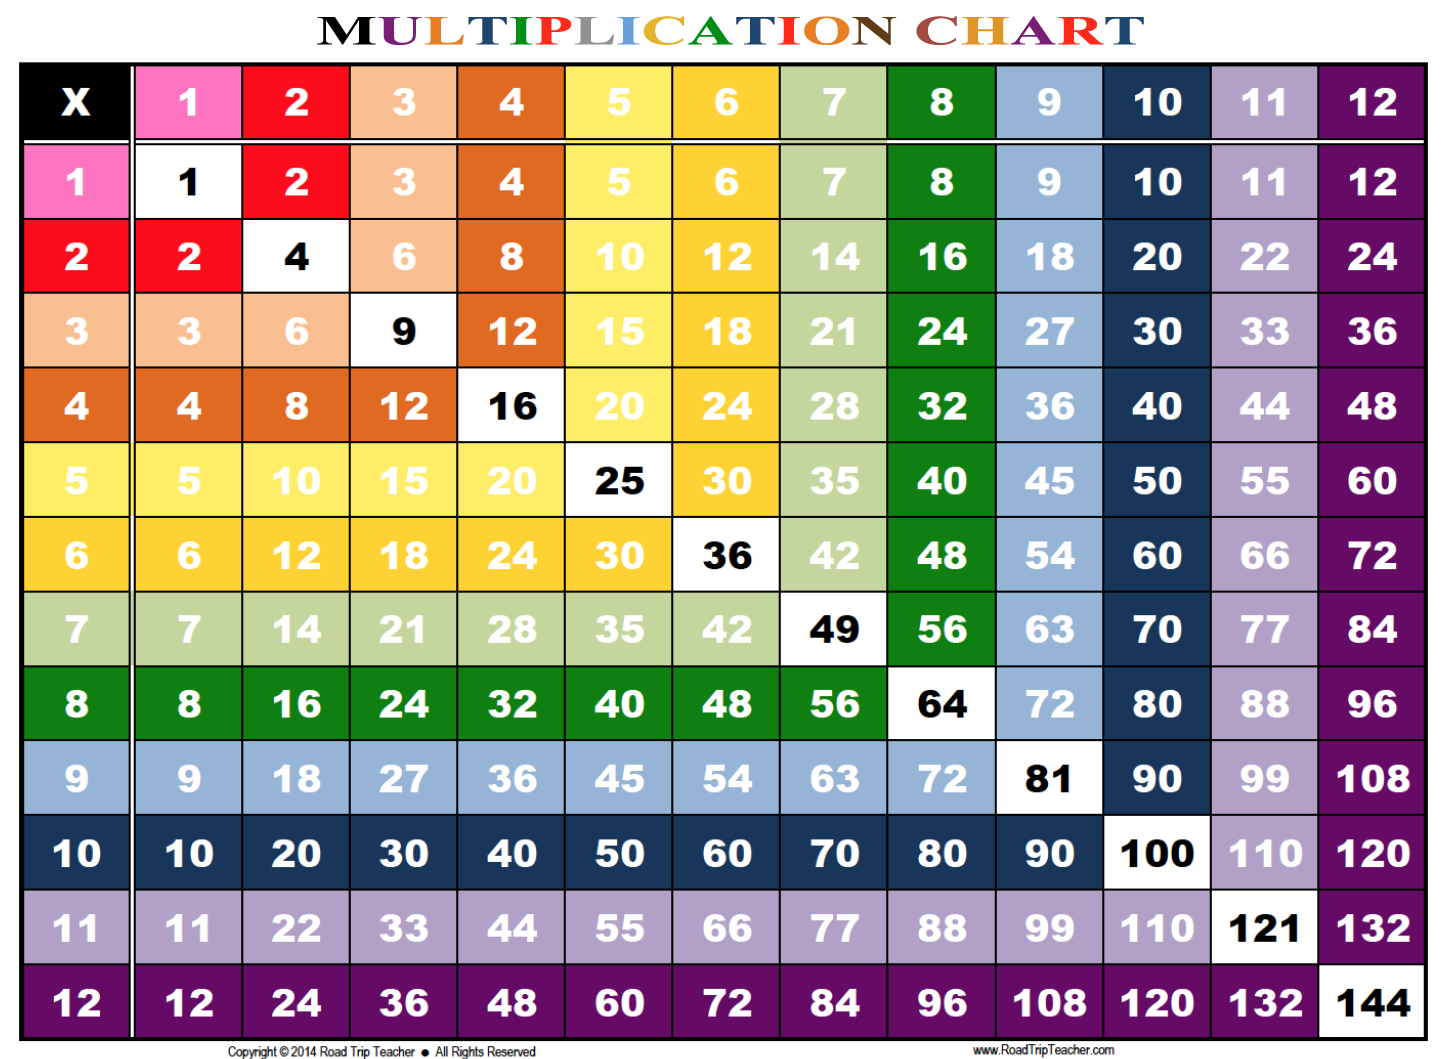 Rainbow Multiplication Chart - Family Educational Resources | Road - Free Printable Multiplication Chart